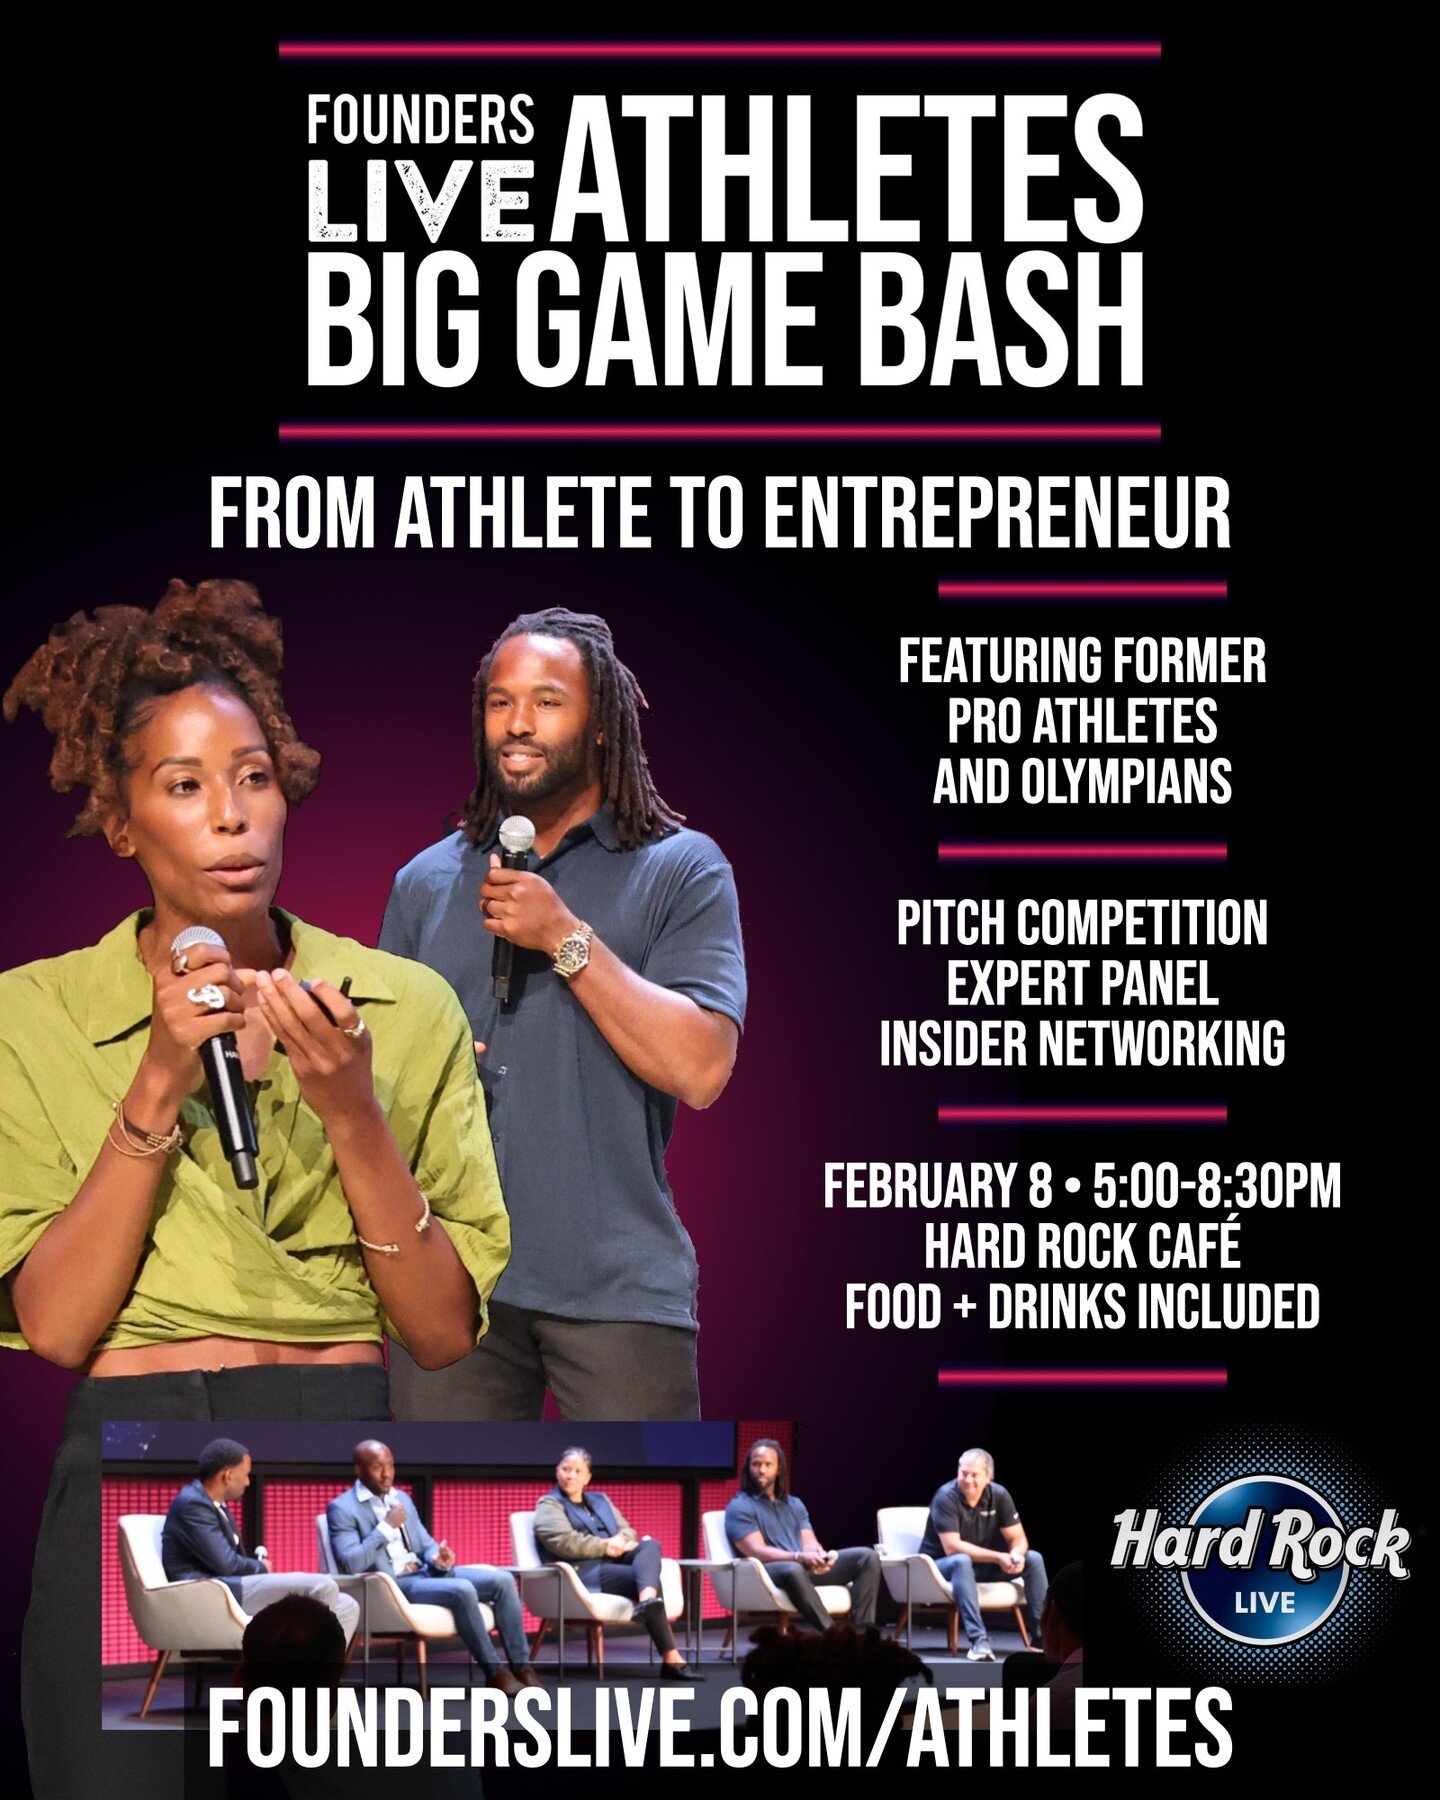 Founders Live Athletes - Big Game Bash is ready for Super Bowl week in Las Vegas! Former pro athletes and Olympians turned founders pitch their startups in just 99 seconds or less in our biggest show yet. 

We've also got a panel of experts and unriv